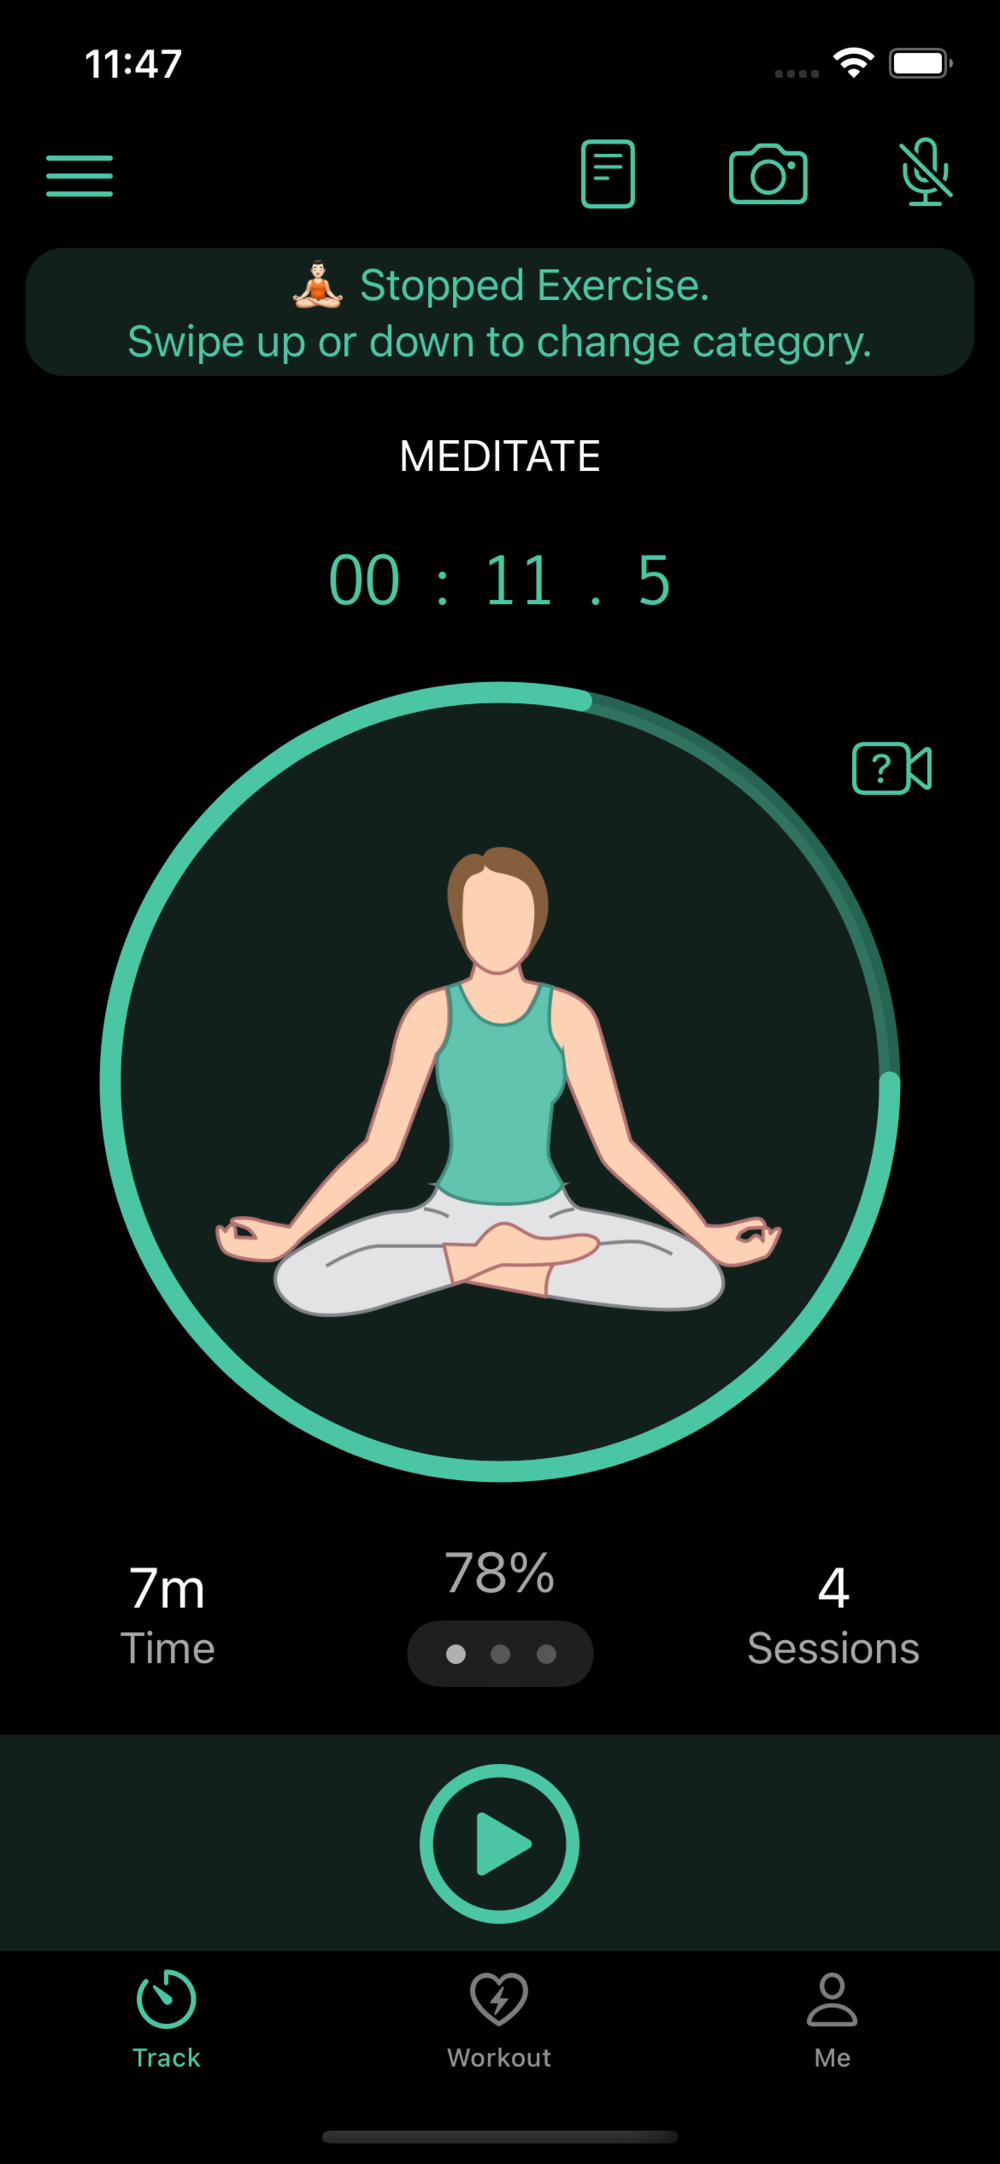 Selected Meditation for tracking